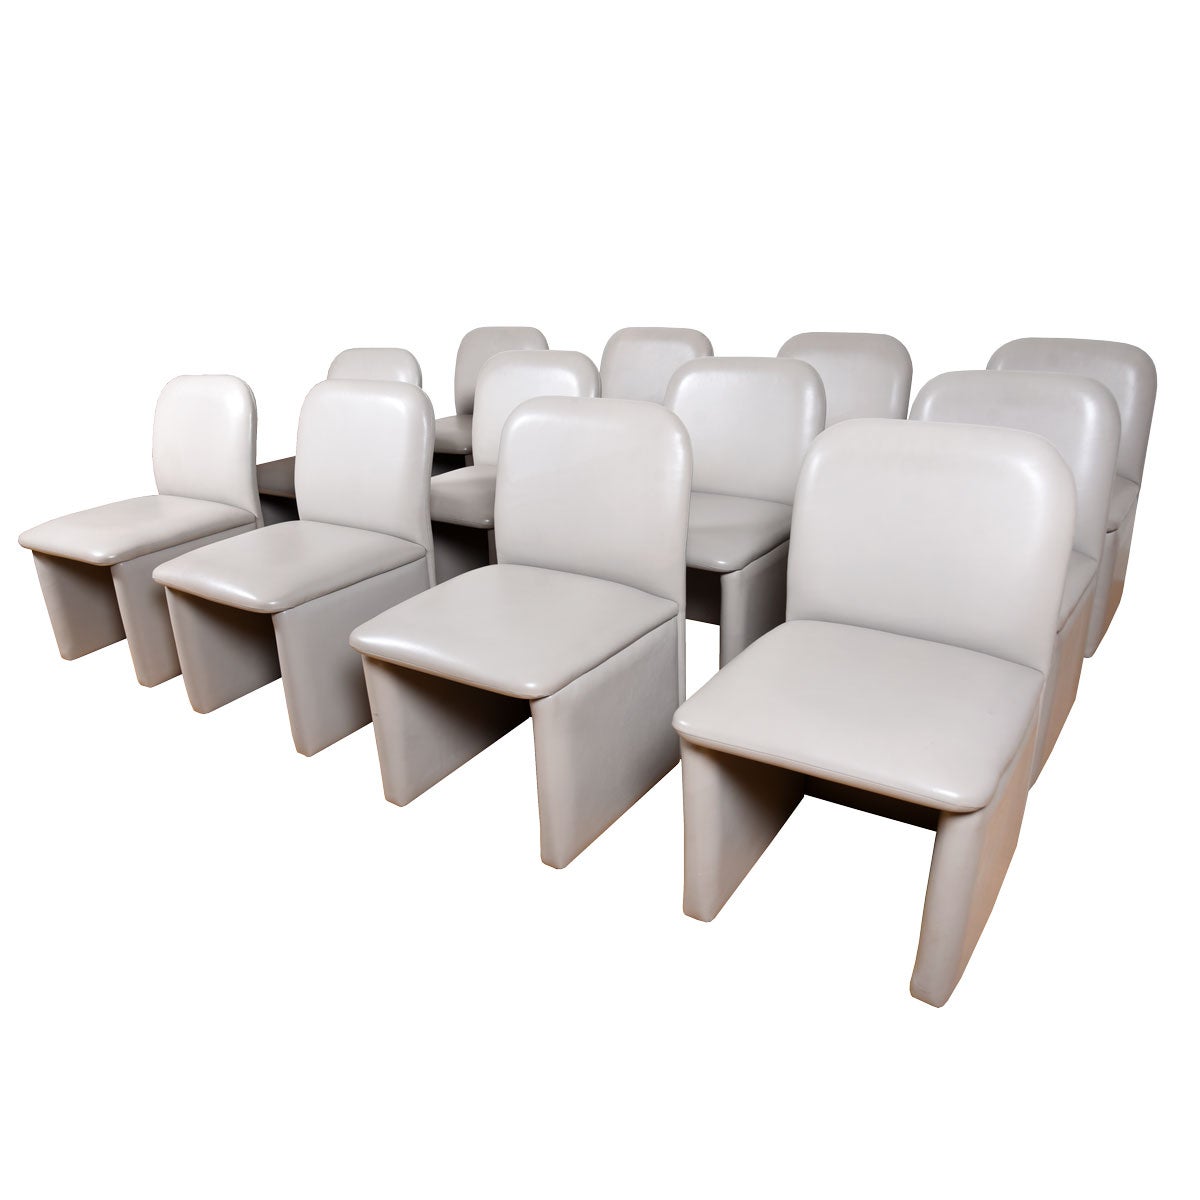 Set of 12 Contemporary Dining / Conference Chairs Fully Upholstered in Leather For Sale